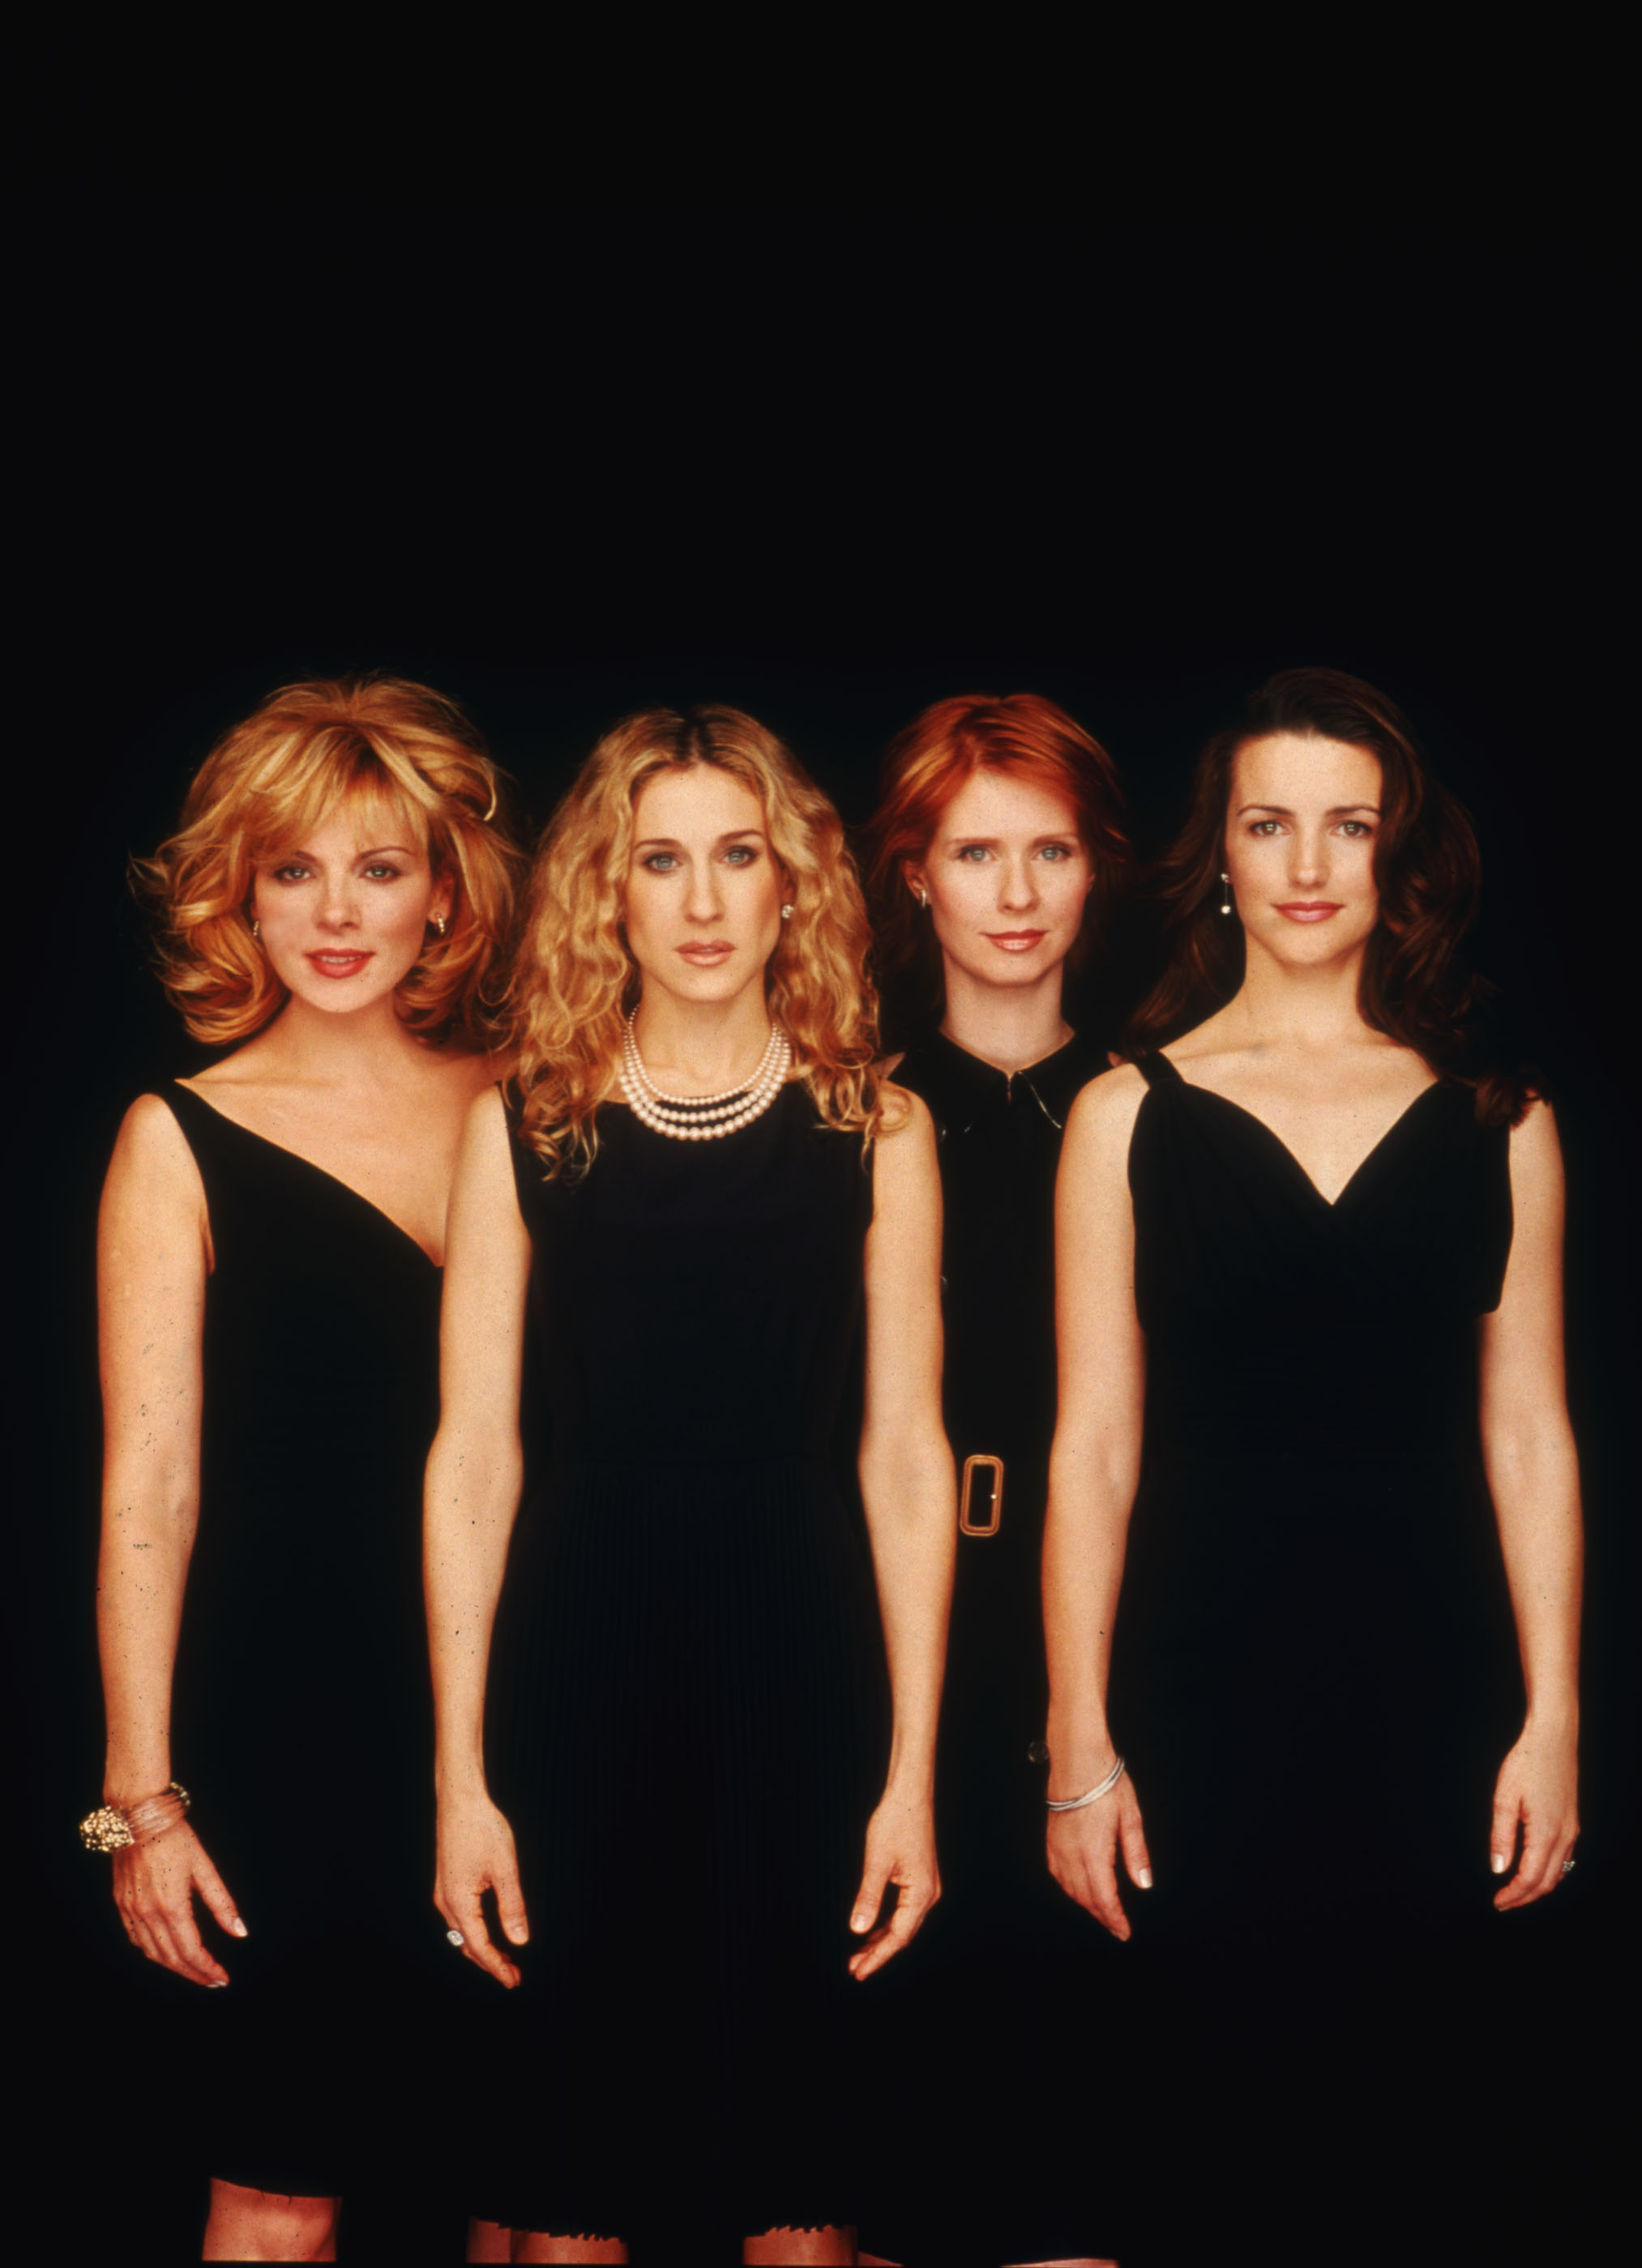 Kim Cattrall, Sarah Jessica Parker, Cynthia Nixon, and Kristin Davis pose for a portrait in an undated photo on the set of the HBO series "Sex and the City." | Source: Getty Images